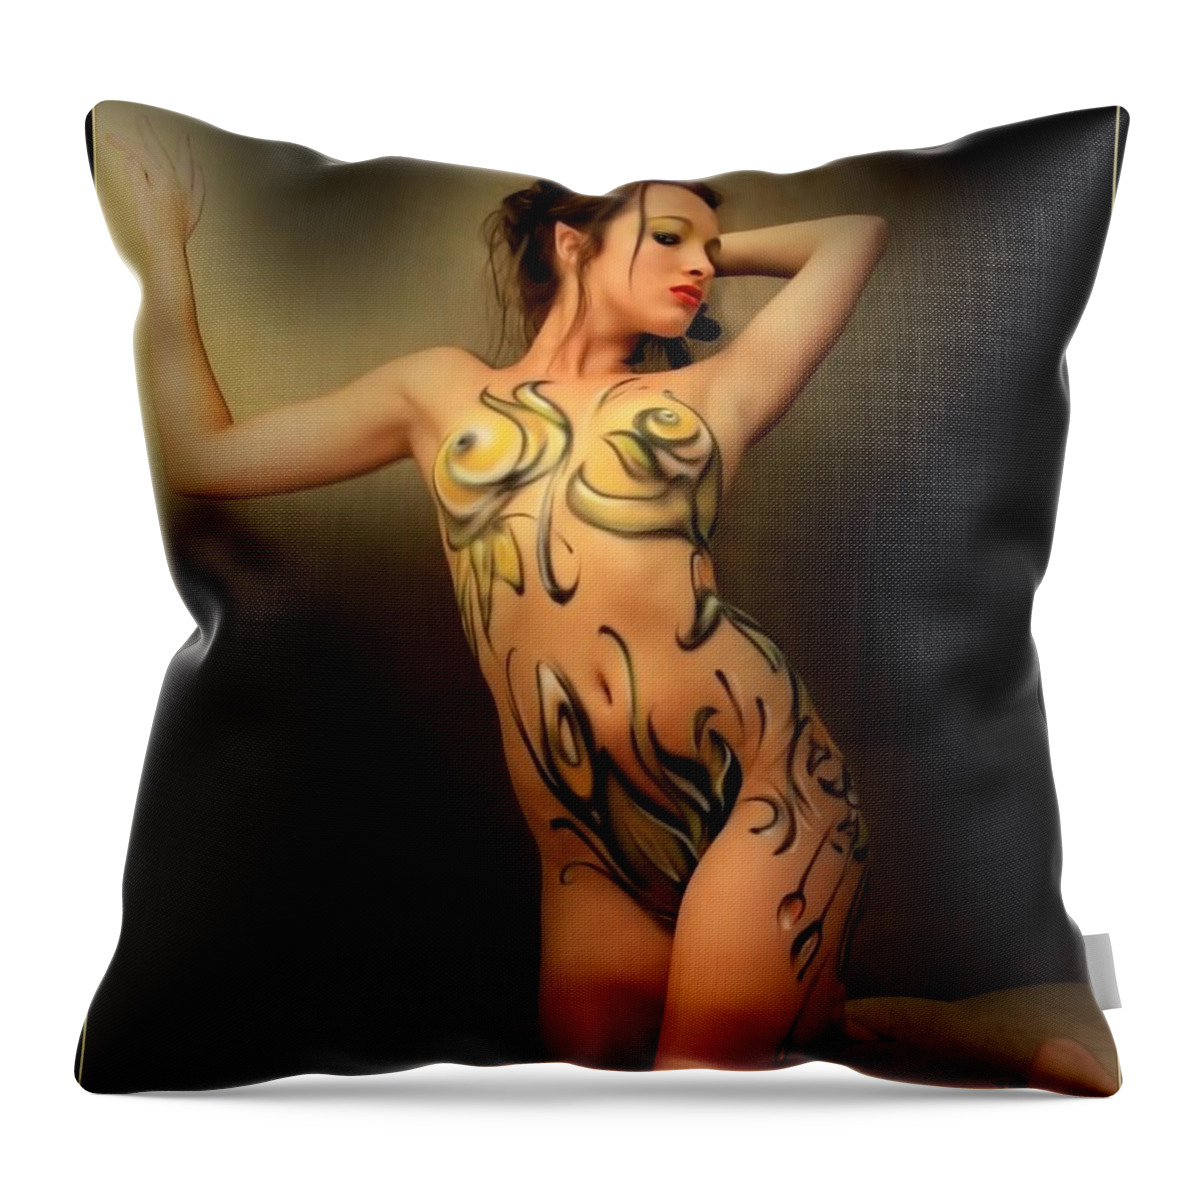 Fairy Throw Pillow featuring the photograph Wood Nymph by Jon Volden